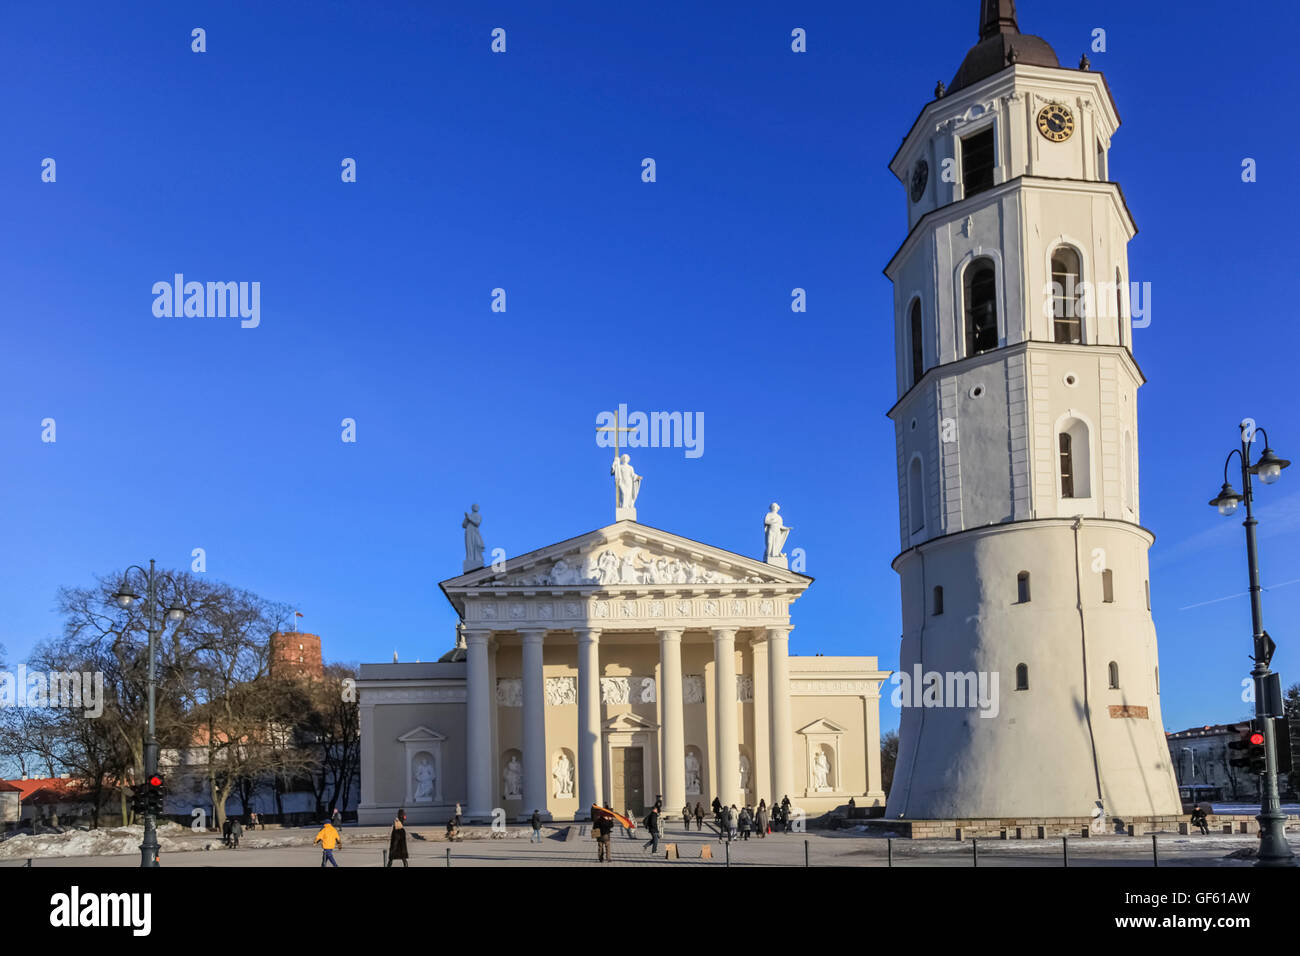 A stroll to the sights of Vilnius. Stock Photo